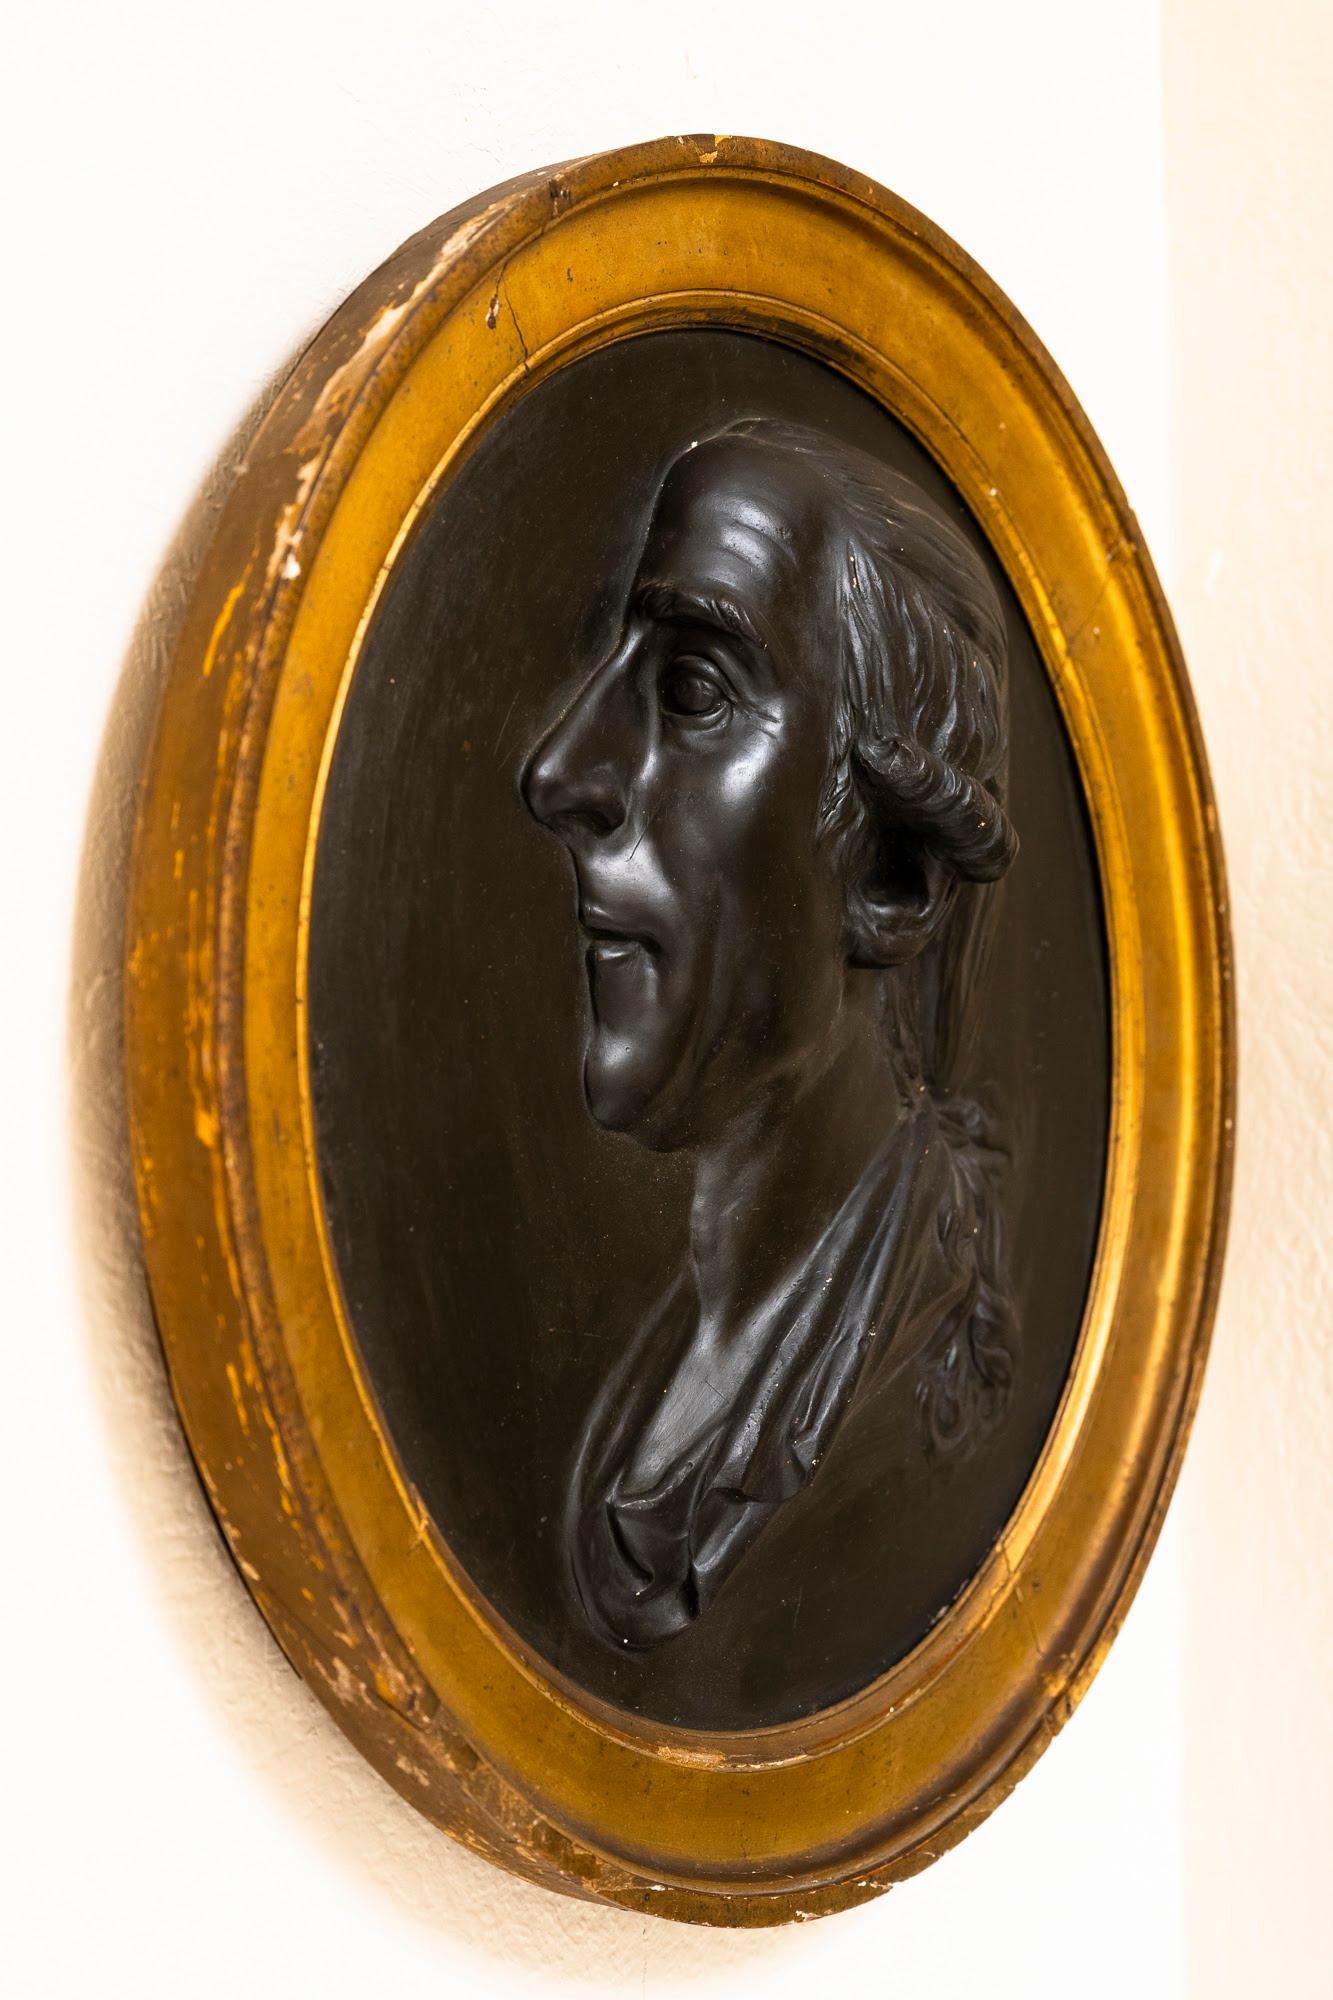 This portrait bust in relief of a French nobleman is mounted in the original gilt frame, though the subject’s identity and the artist remain a mystery. Beautifully sculpted, the bust remains in good condition, however the giltwood frame has suffered